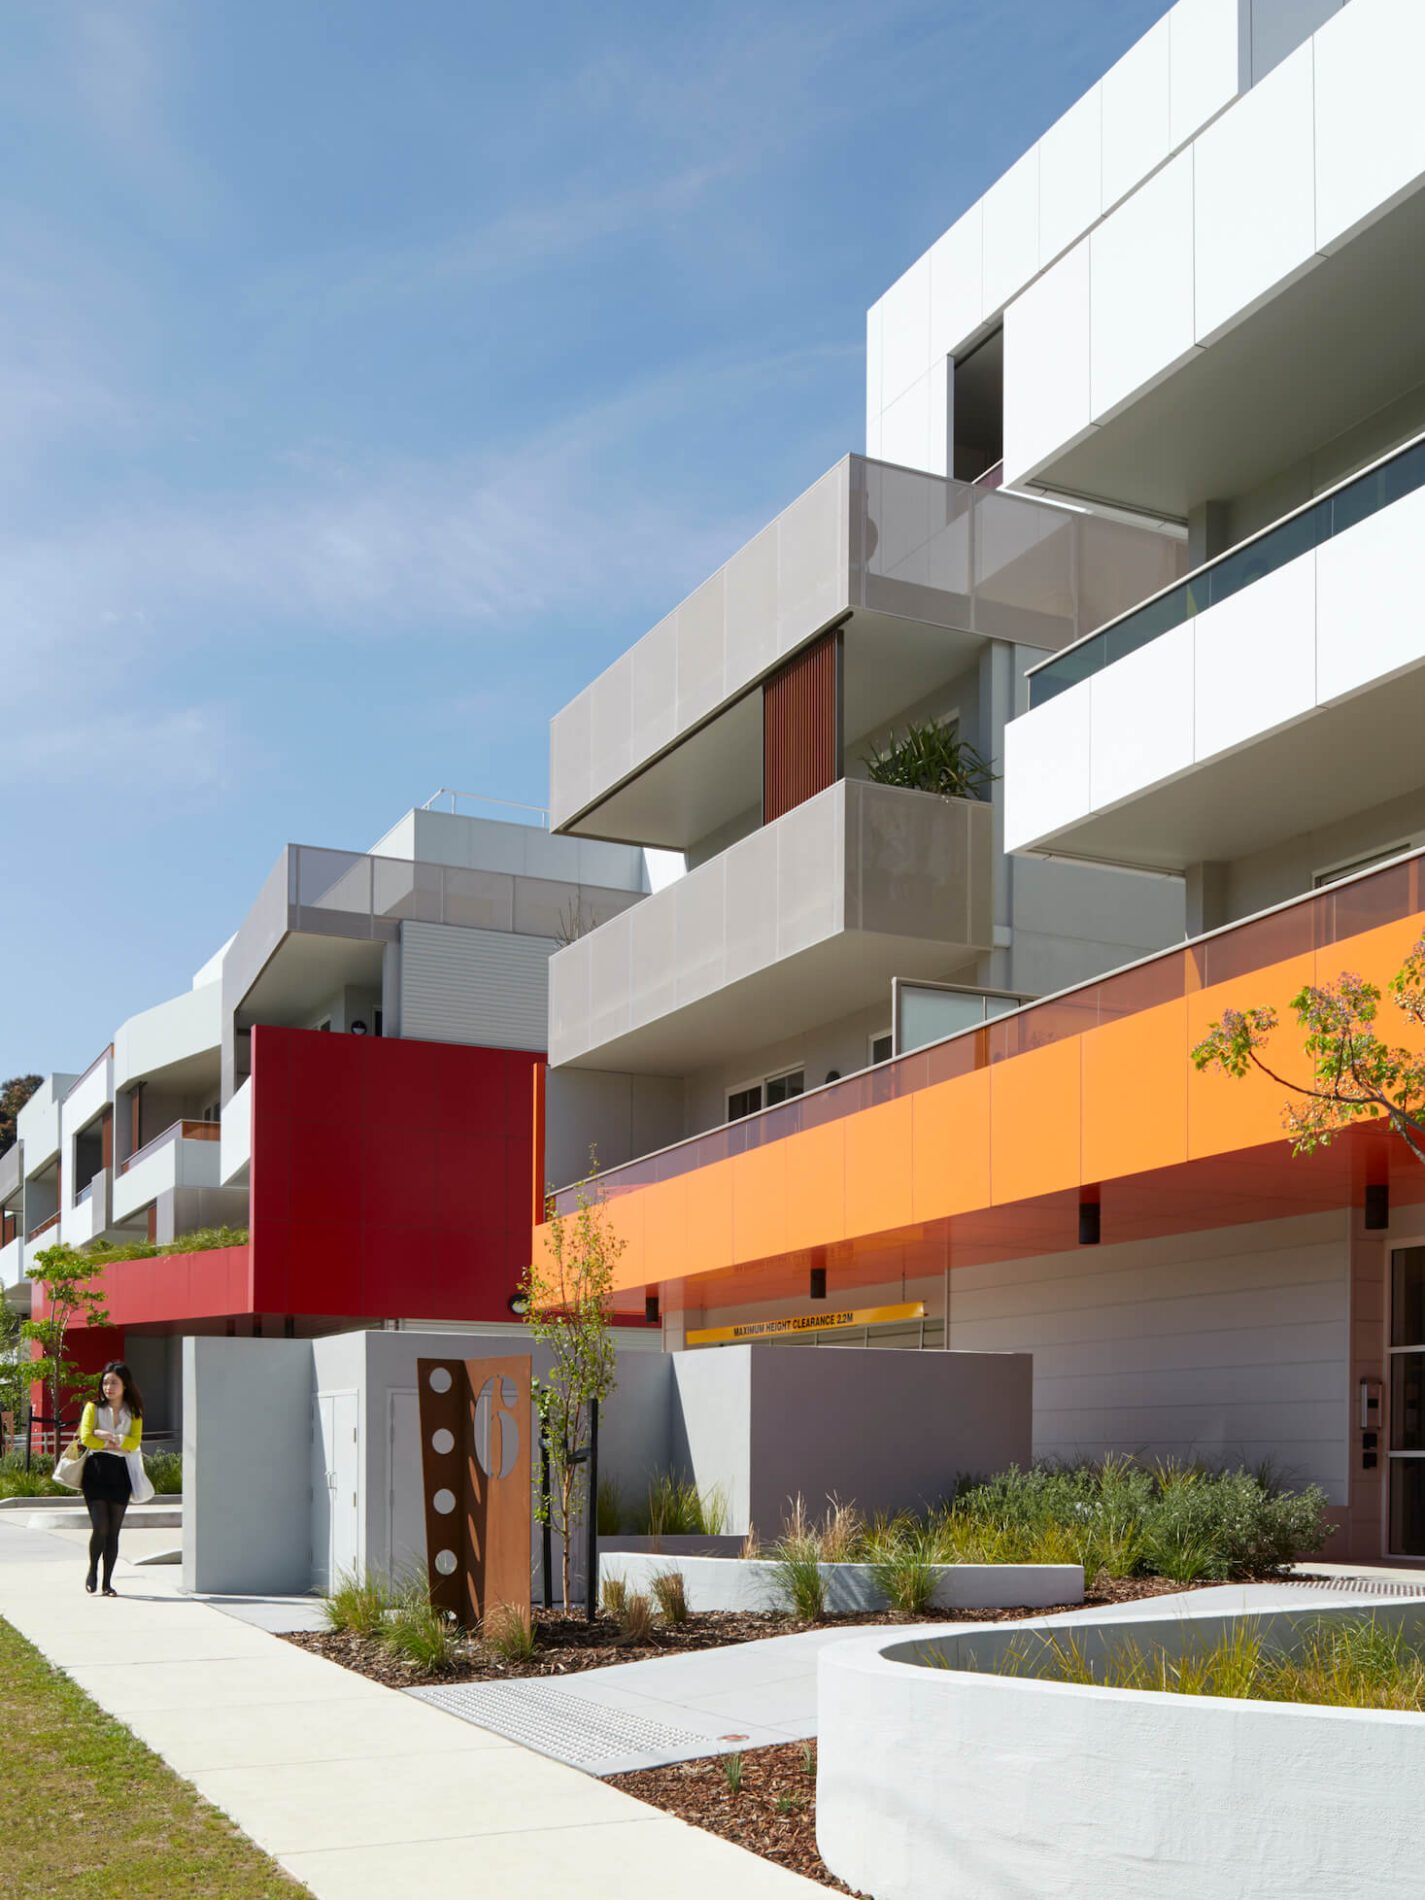 A white multi-storey apartment building with red and orange cladding feature elements, pedestrians and native landscaping out front